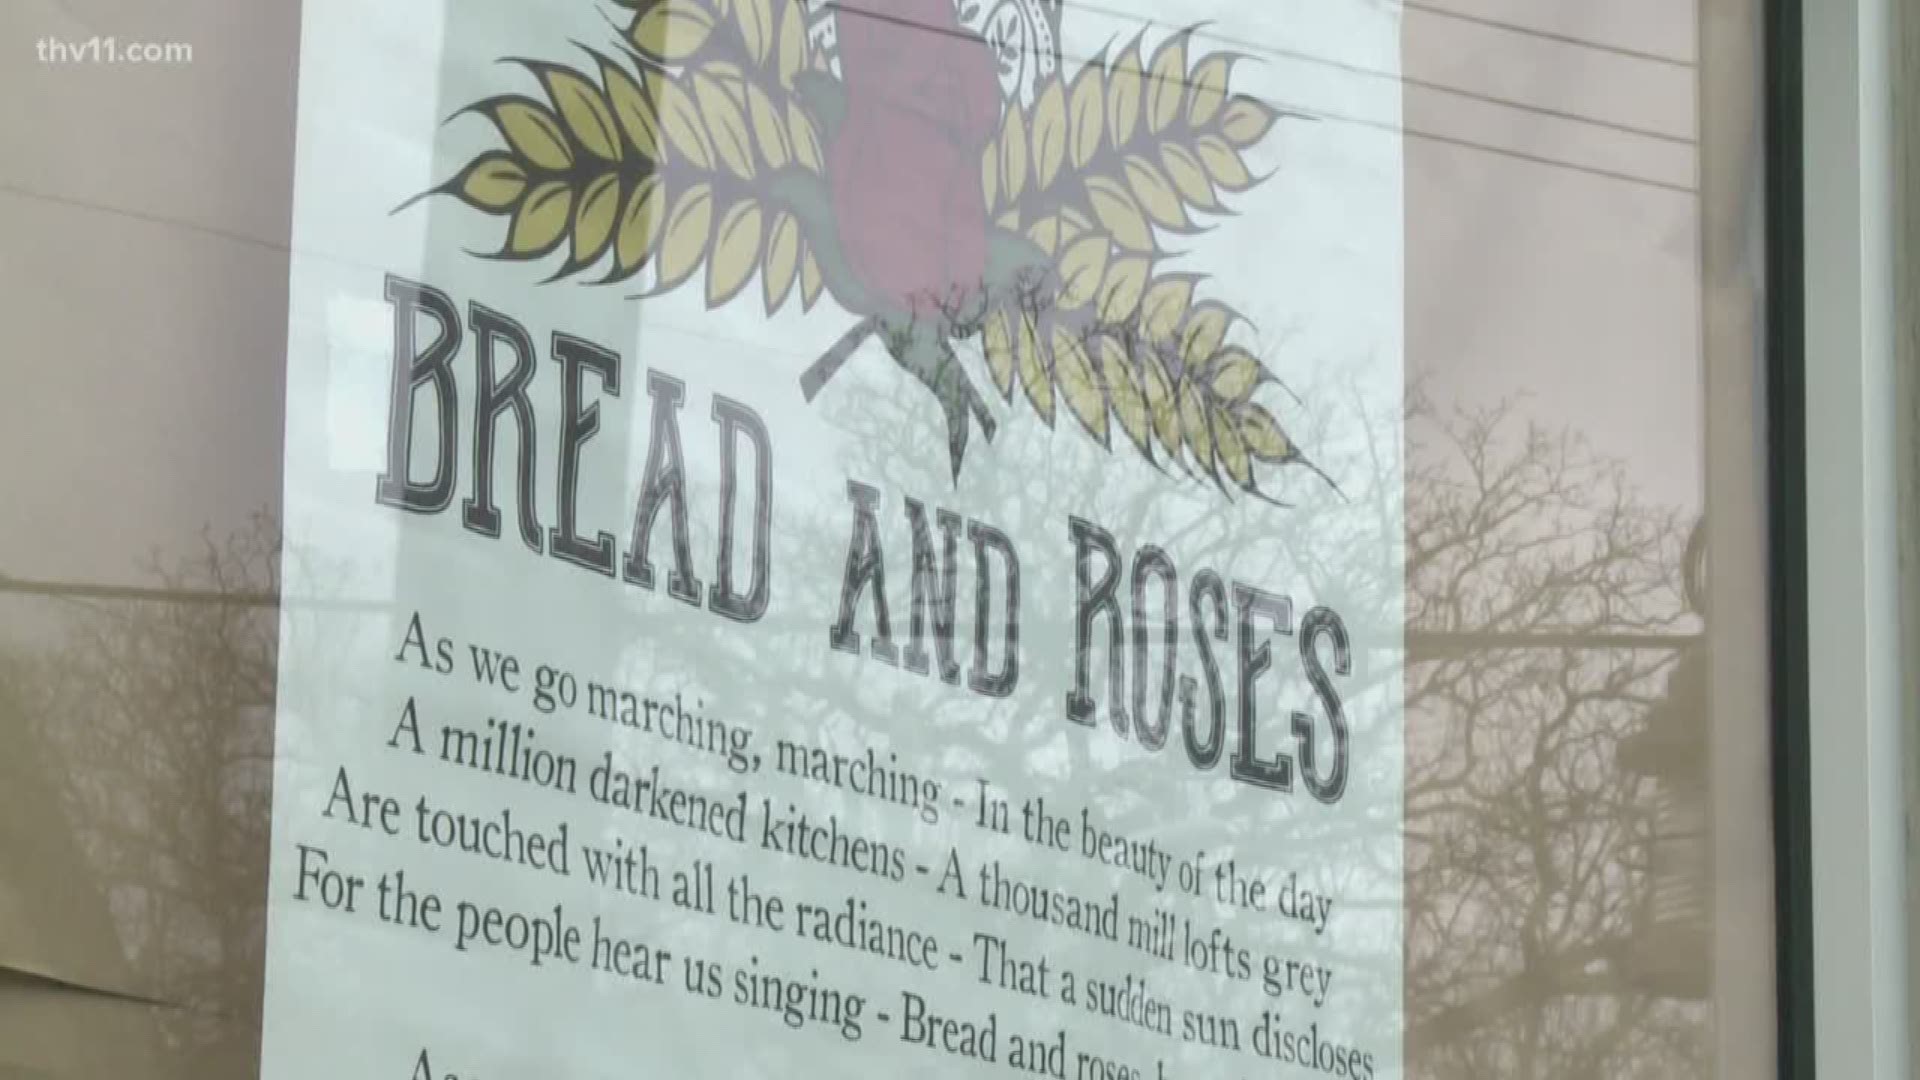 Bread and Roses Cooperative has been in the works since November. The creators plan for it to be a one-stop shop for art, music, soaps and produce.